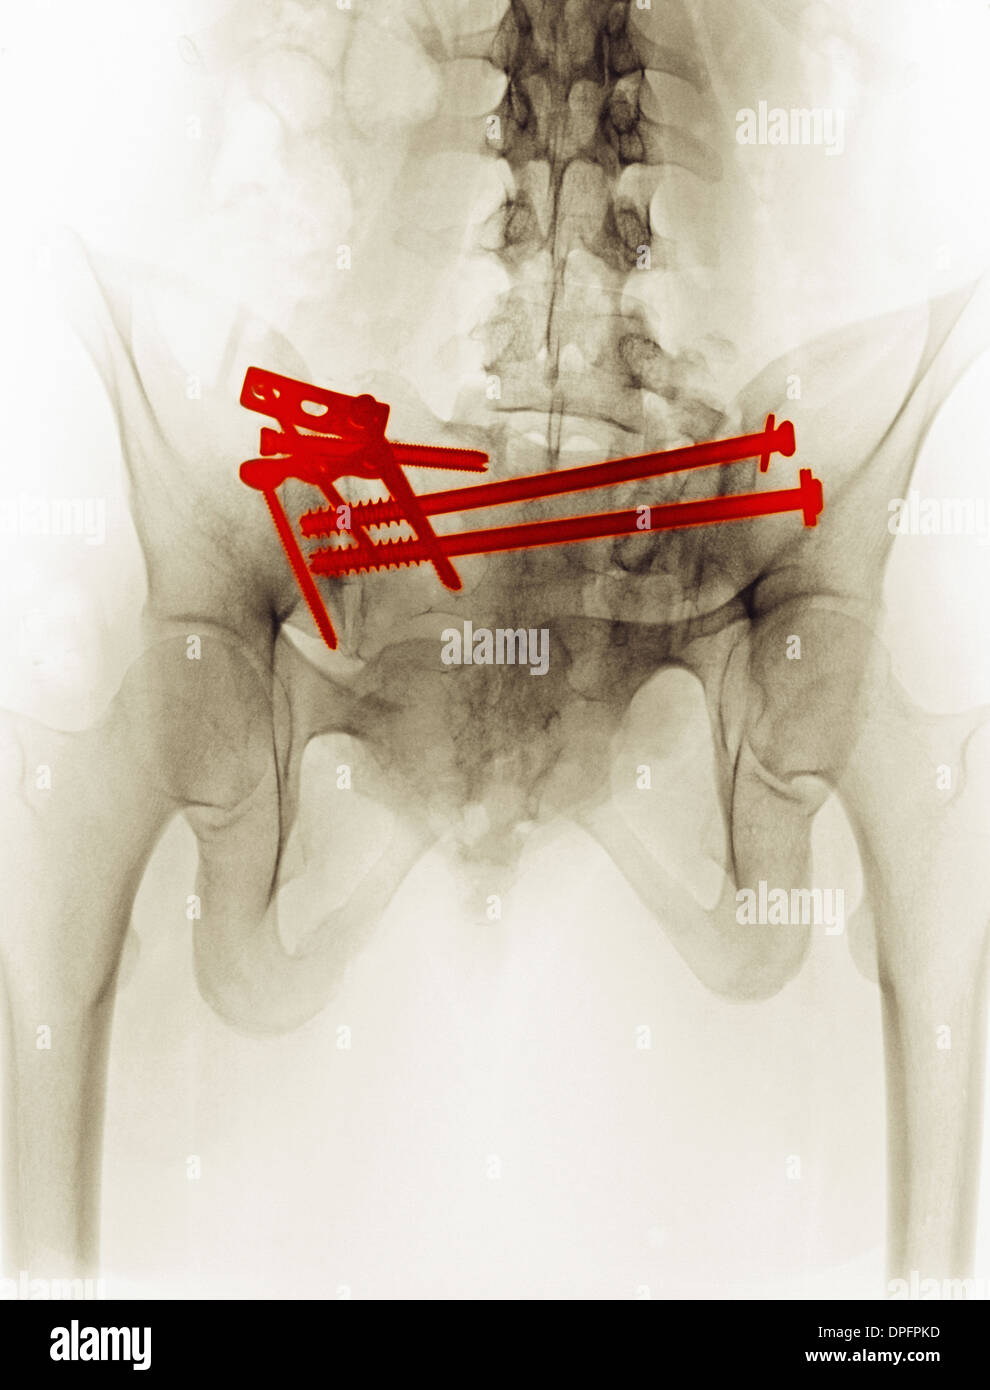 x-ray showing surgical repair of pelvic fracture Stock Photo